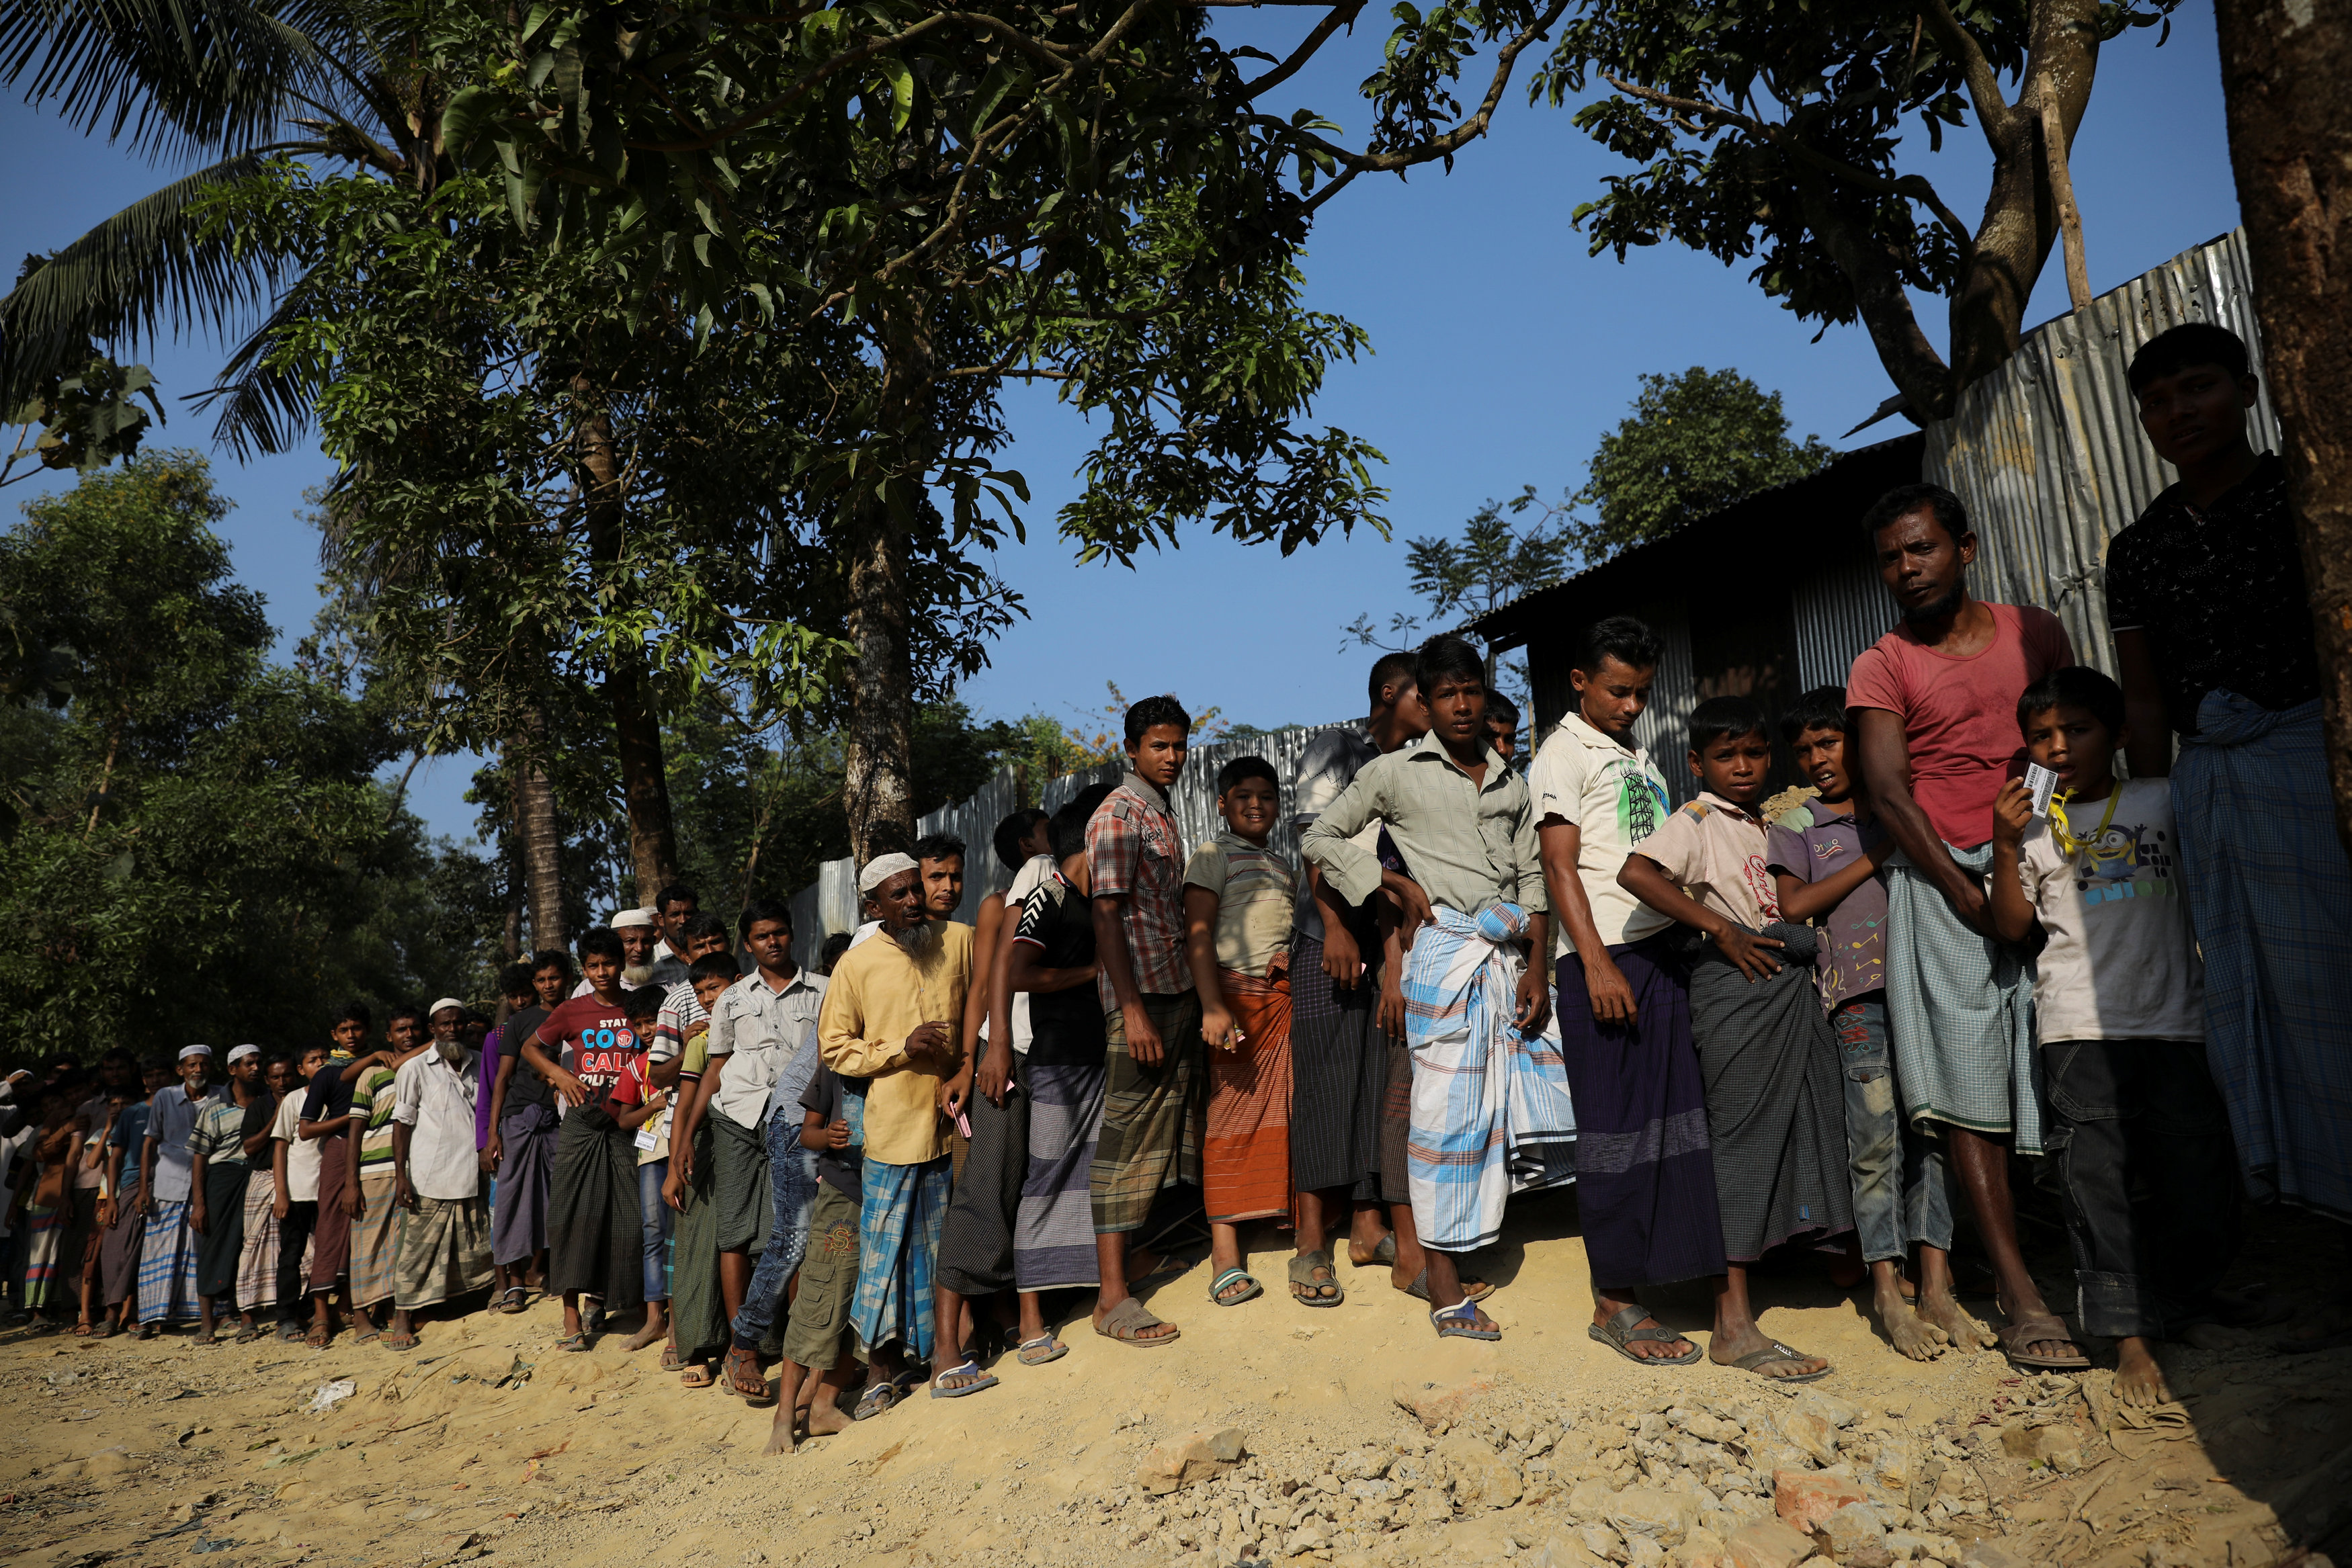 21 die from diphtheria in Bangladesh Rohingya camps